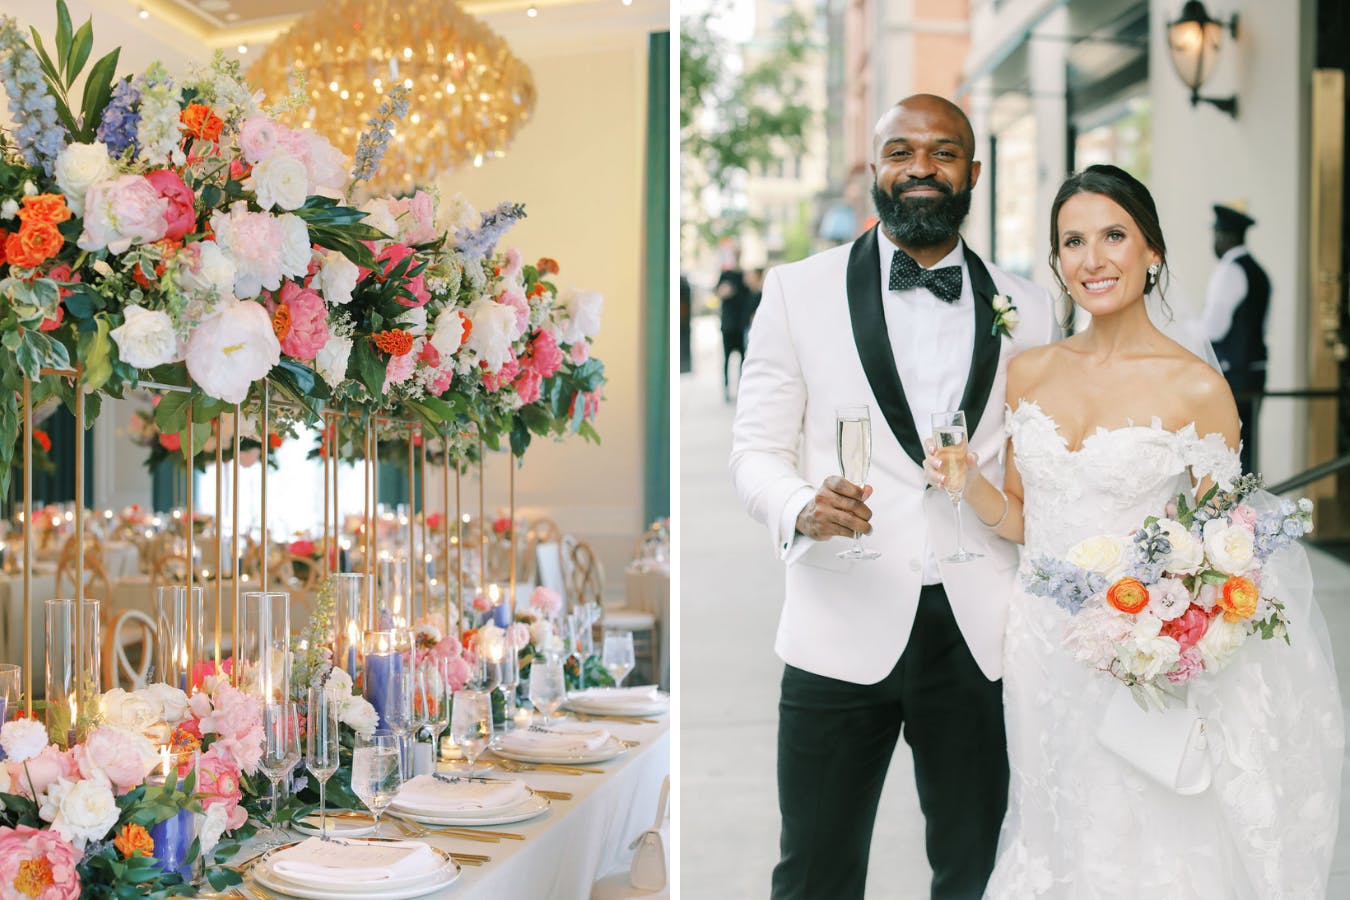 This elegant spring wedding mixed whimsy and classical charm with blue delphiniums, pink and white peonies, and lush greenery | PartySlate